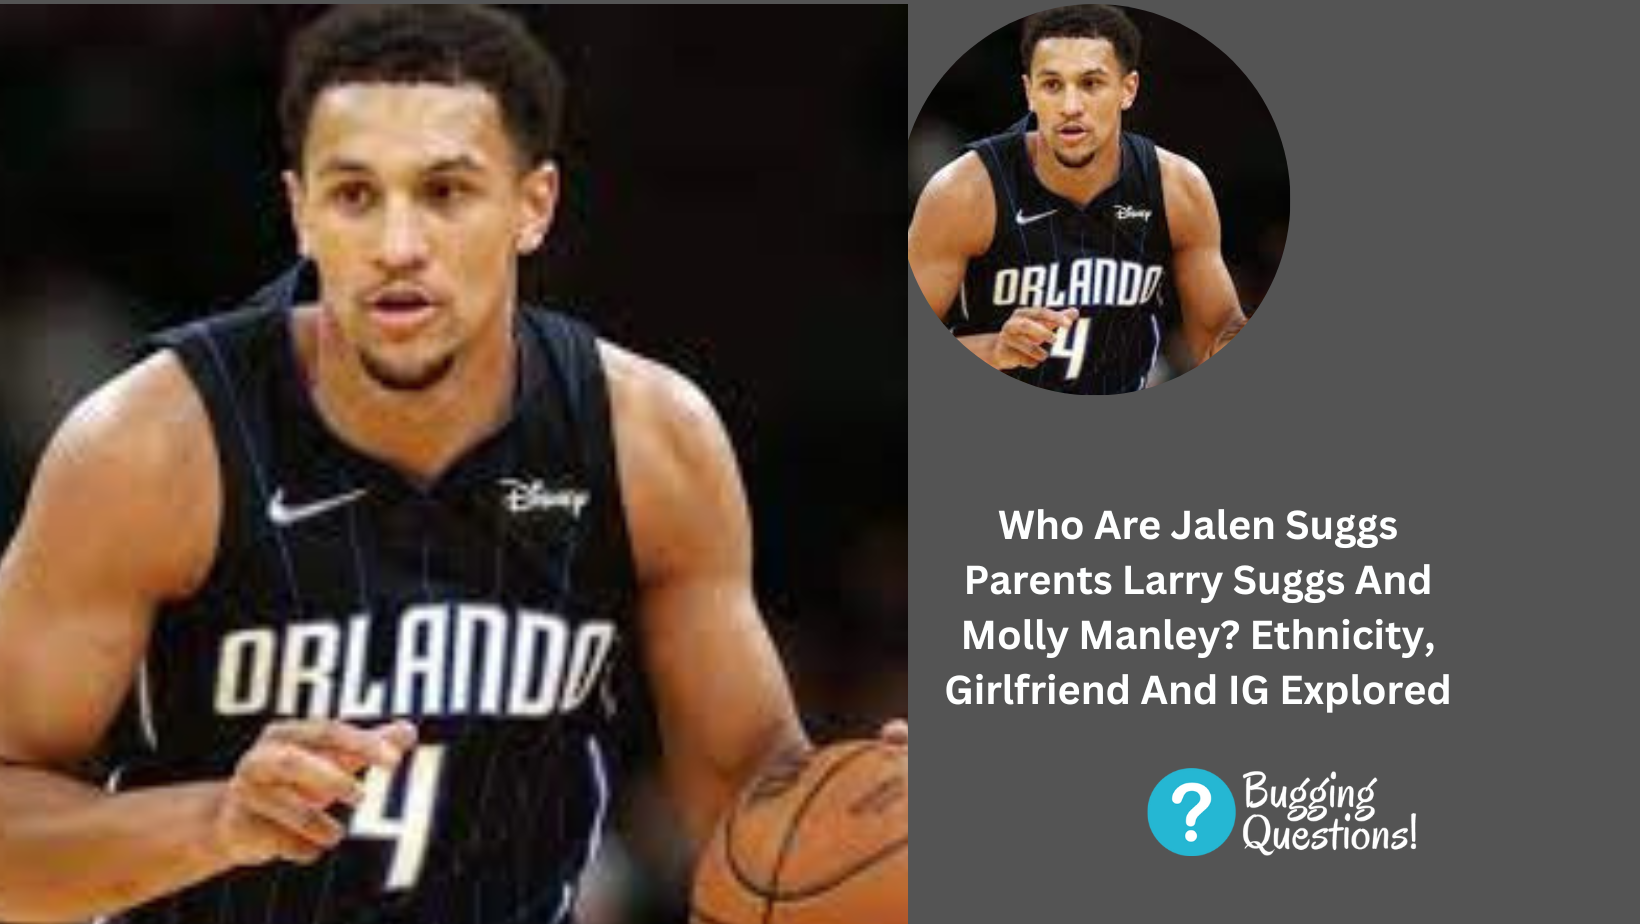 Who Are Jalen Suggs Parents Larry Suggs And Molly Manley?